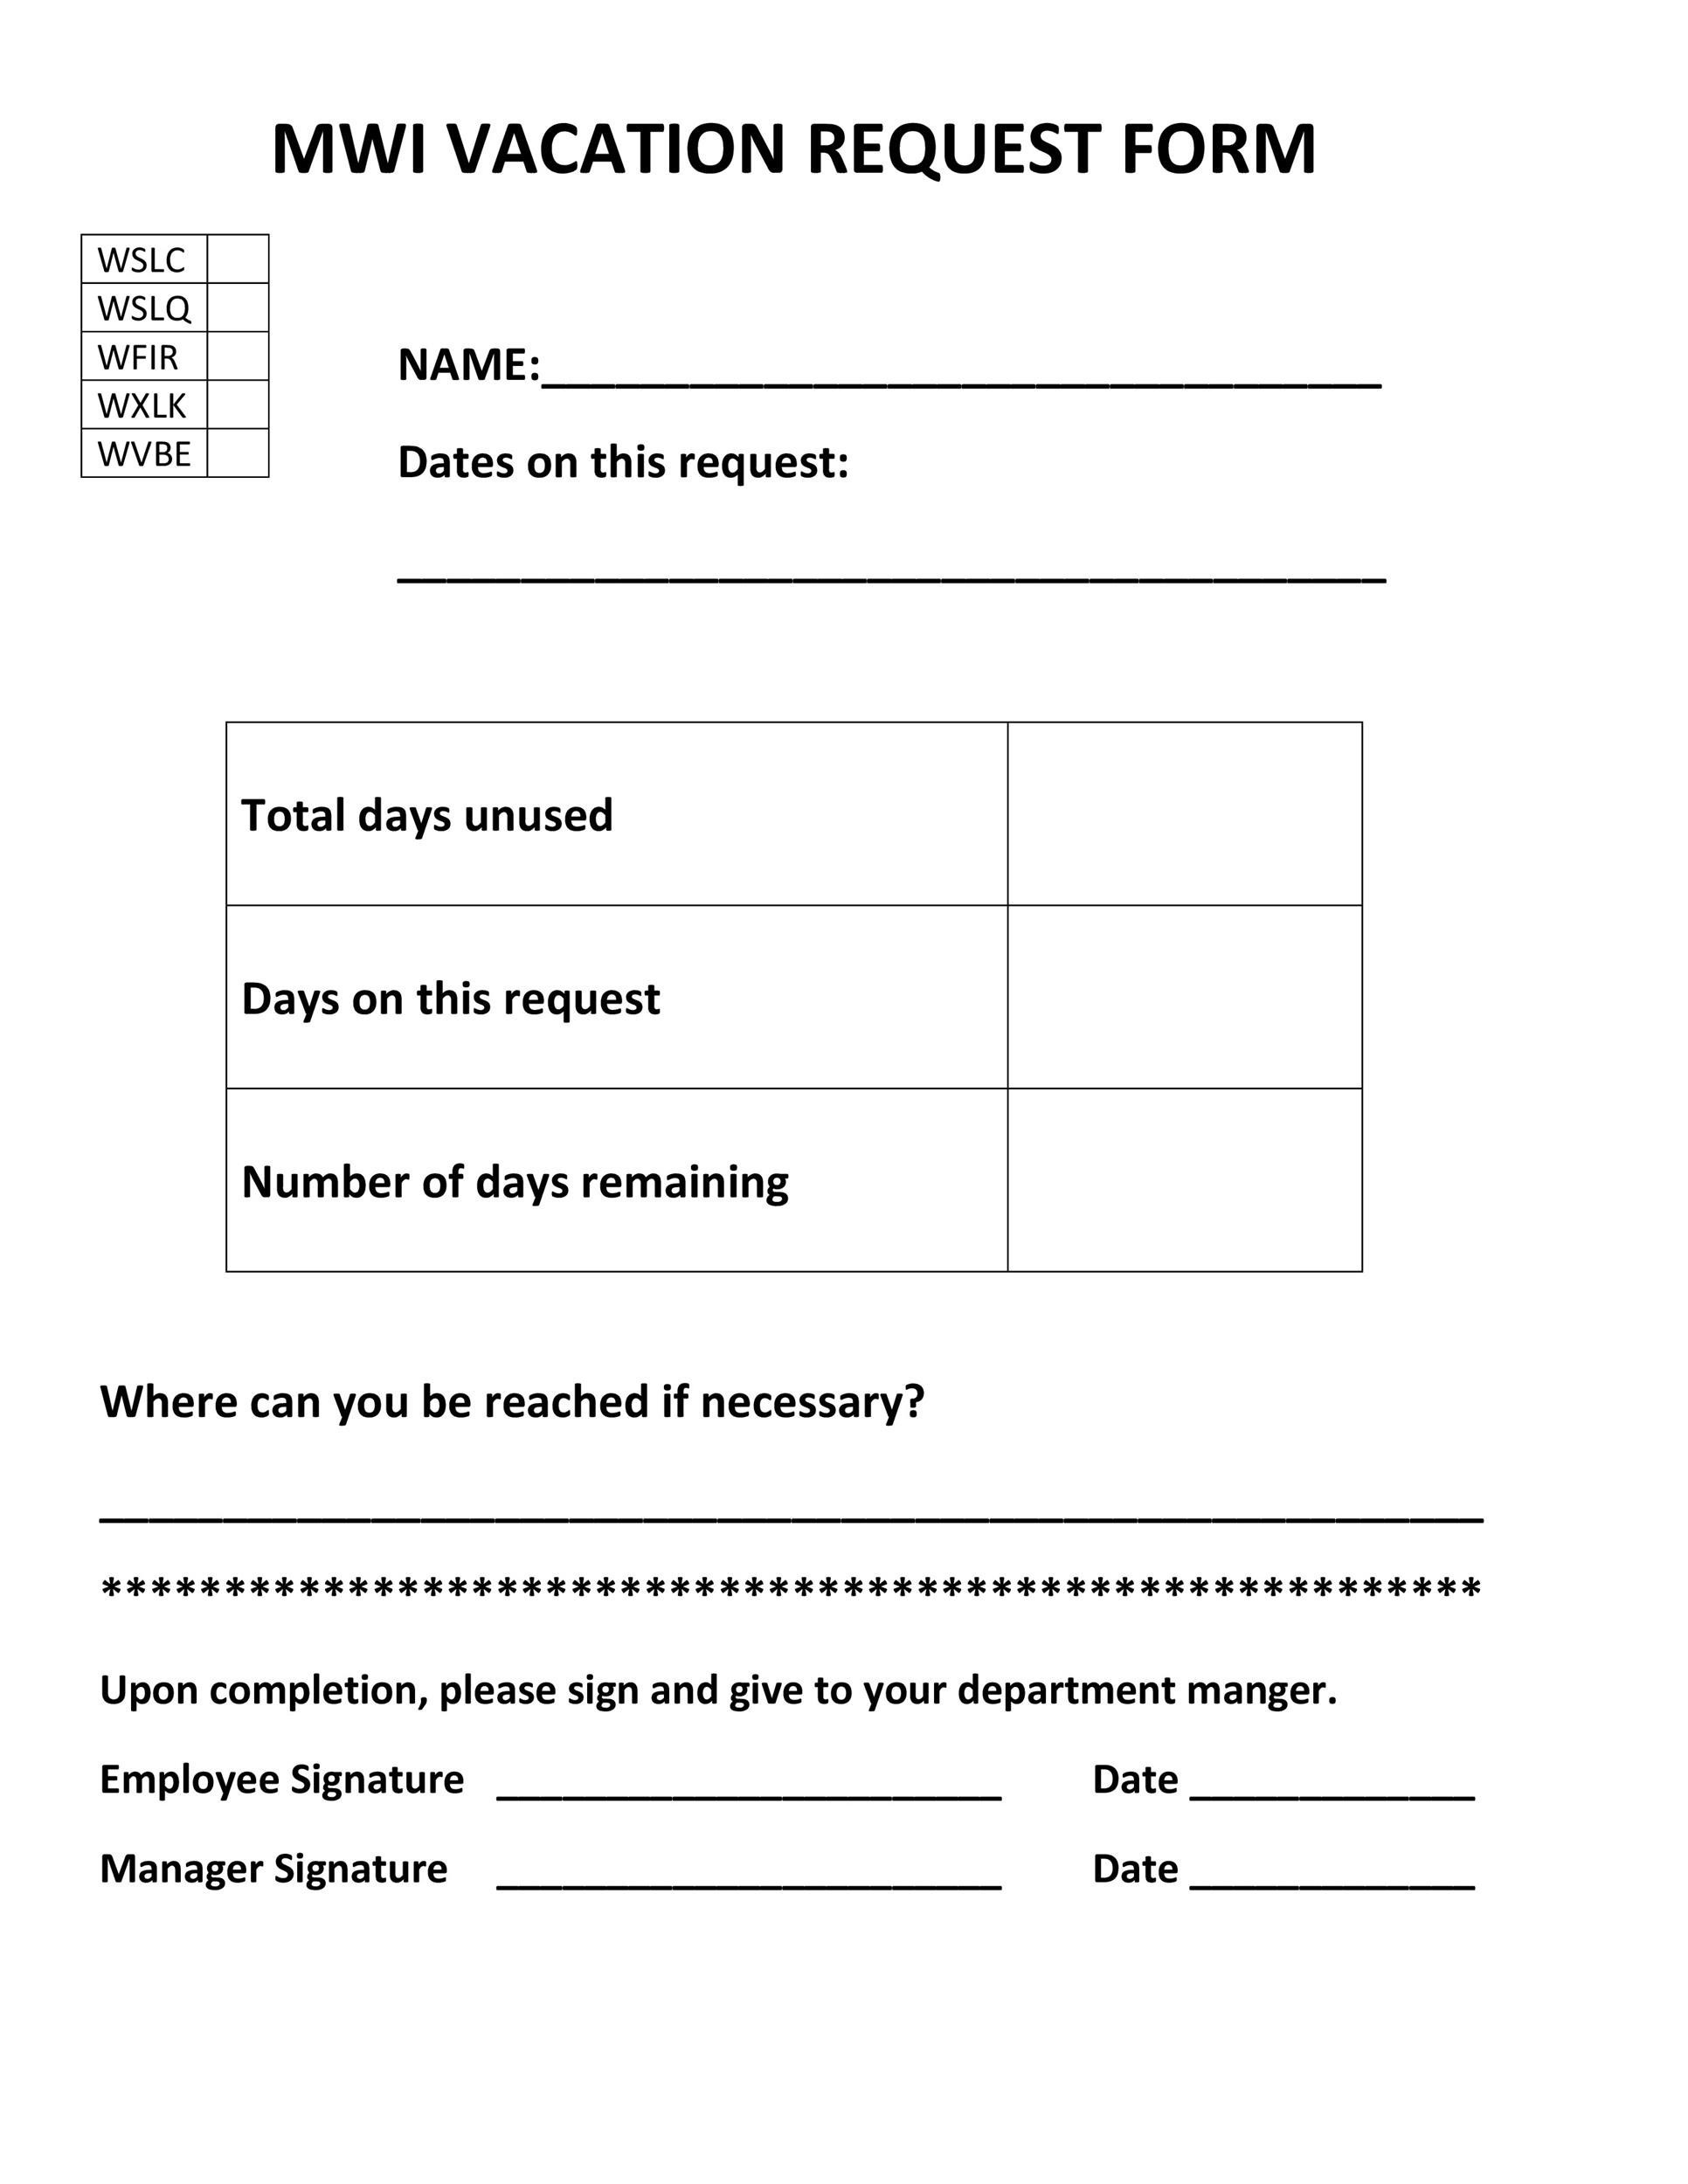 50 Professional Employee Vacation Request Forms [Word] ᐅ-Printable 2021 Vacation Forms